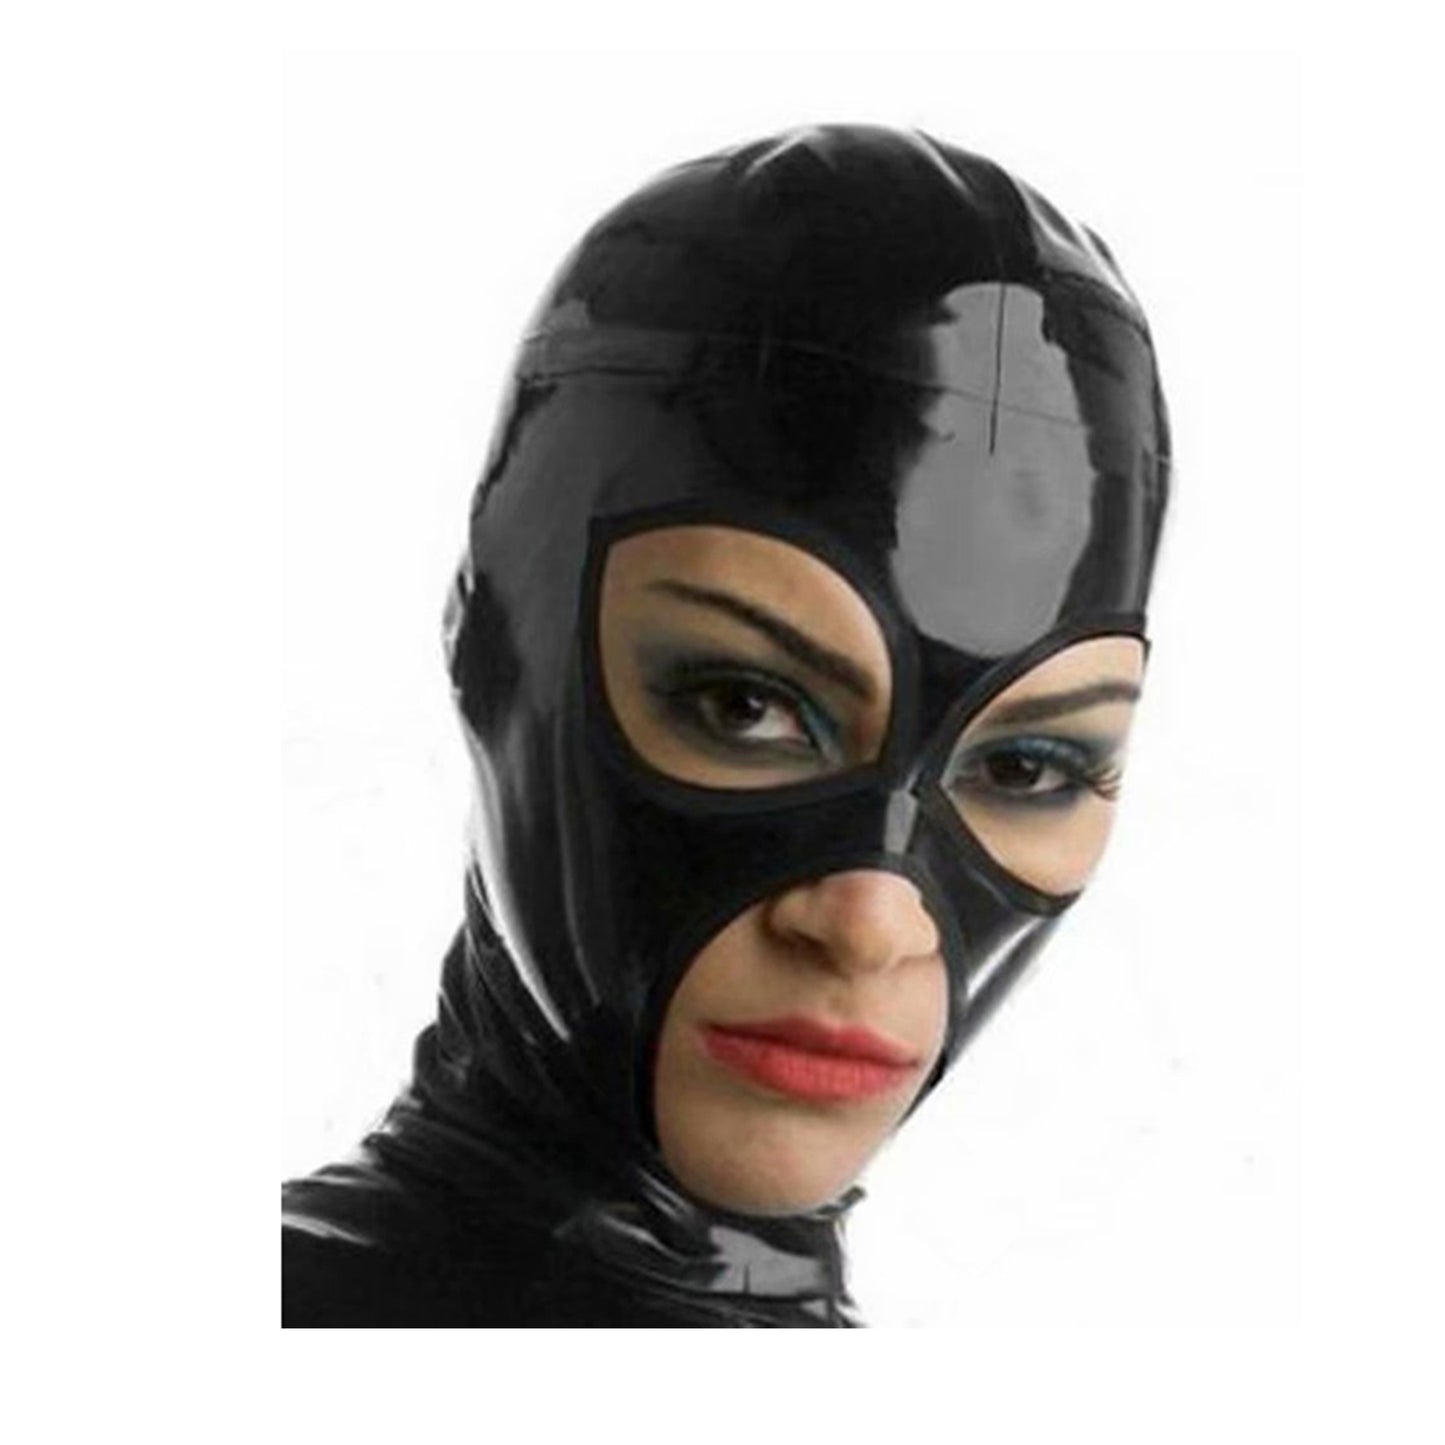 MONNIK Latex Mask Black Rubber Unisex Hood Open Eyes and Mouth Handmade for Latex Fetish Party Catsuit Halloween Clubwear